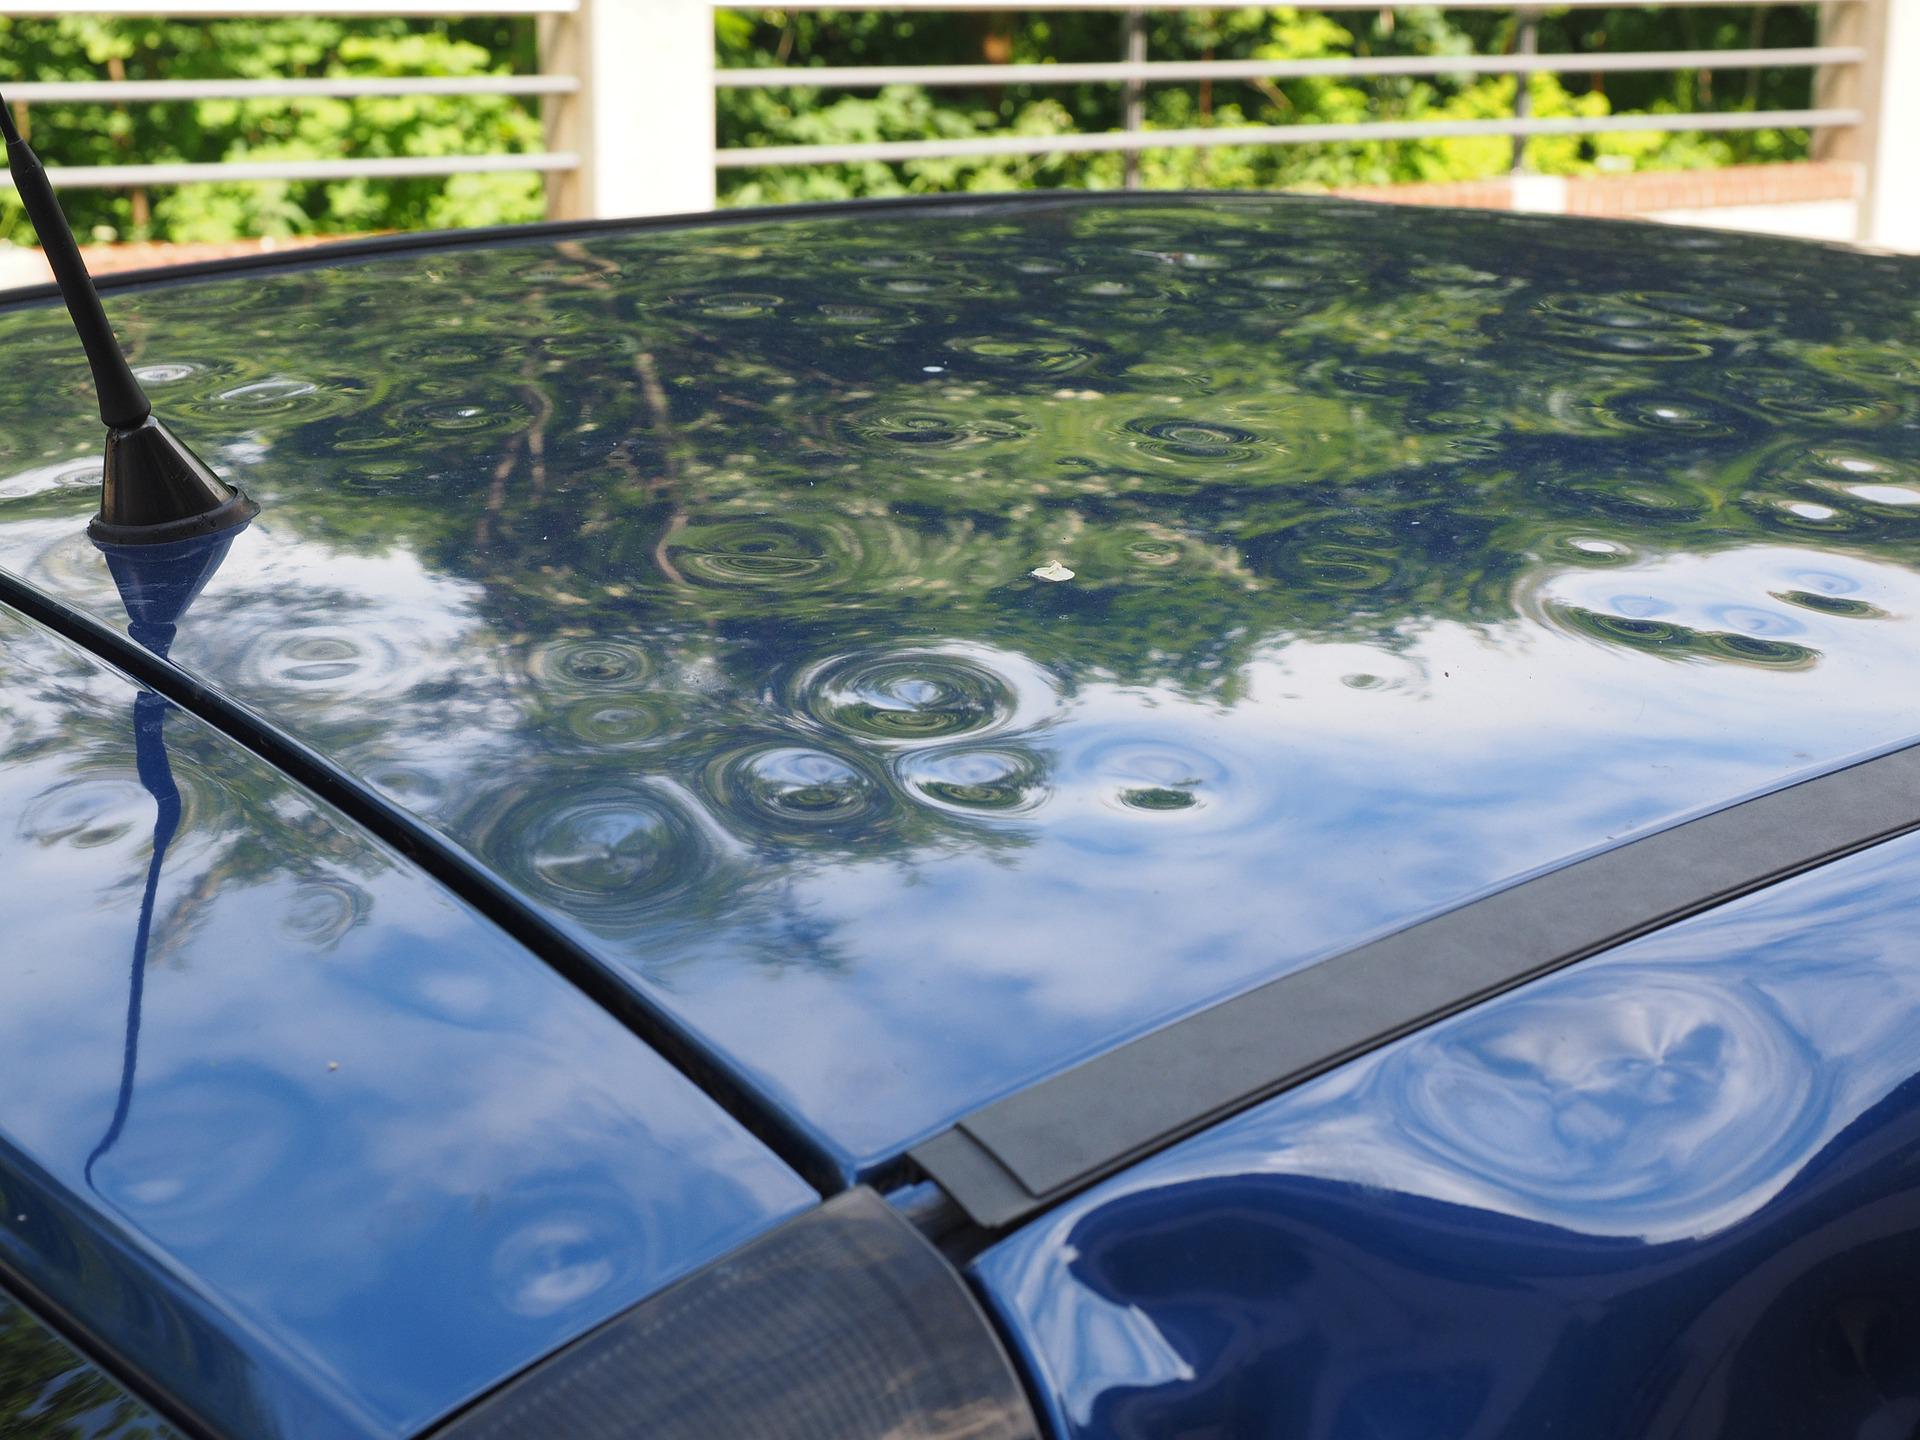 paintless dent repair can fix hail damage on cars